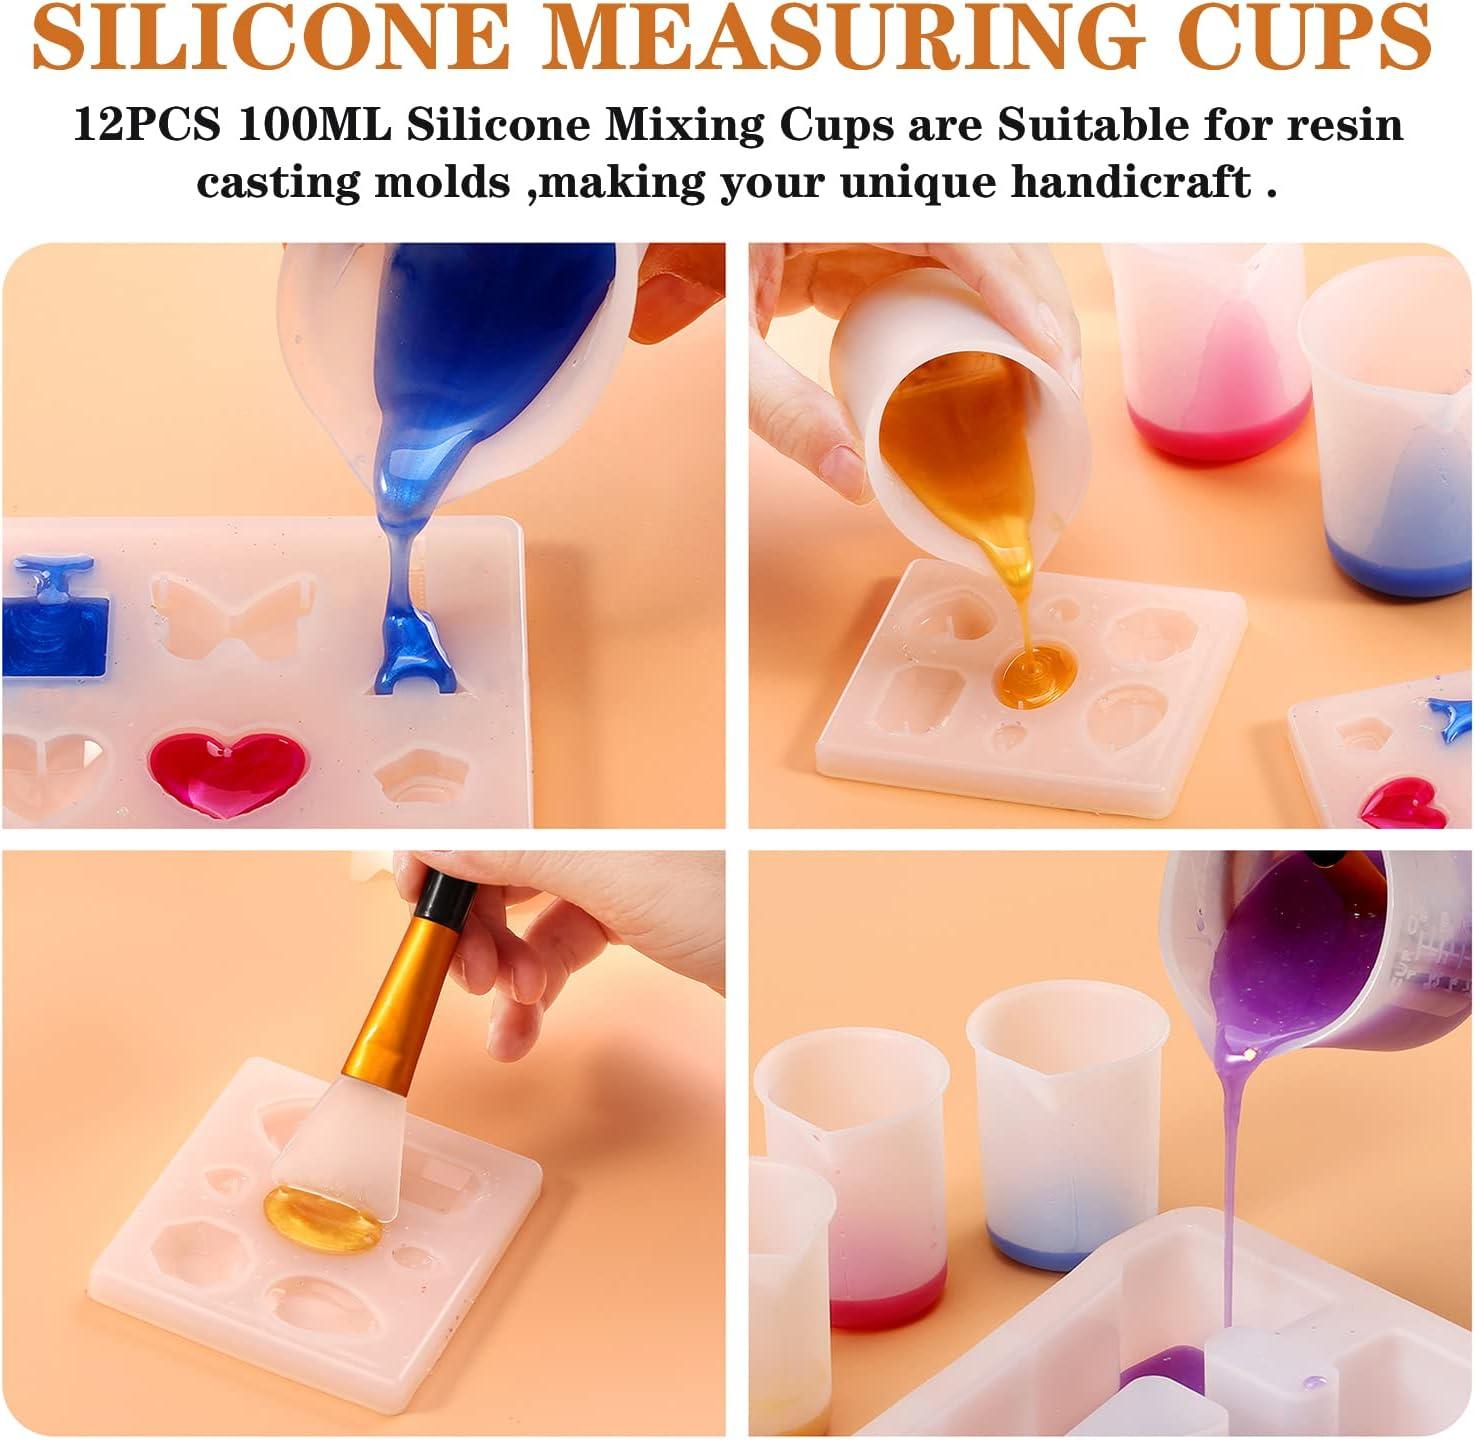 12PCS Silicone Measuring Cups for Resin,12PCS 100ml Measuring Cups